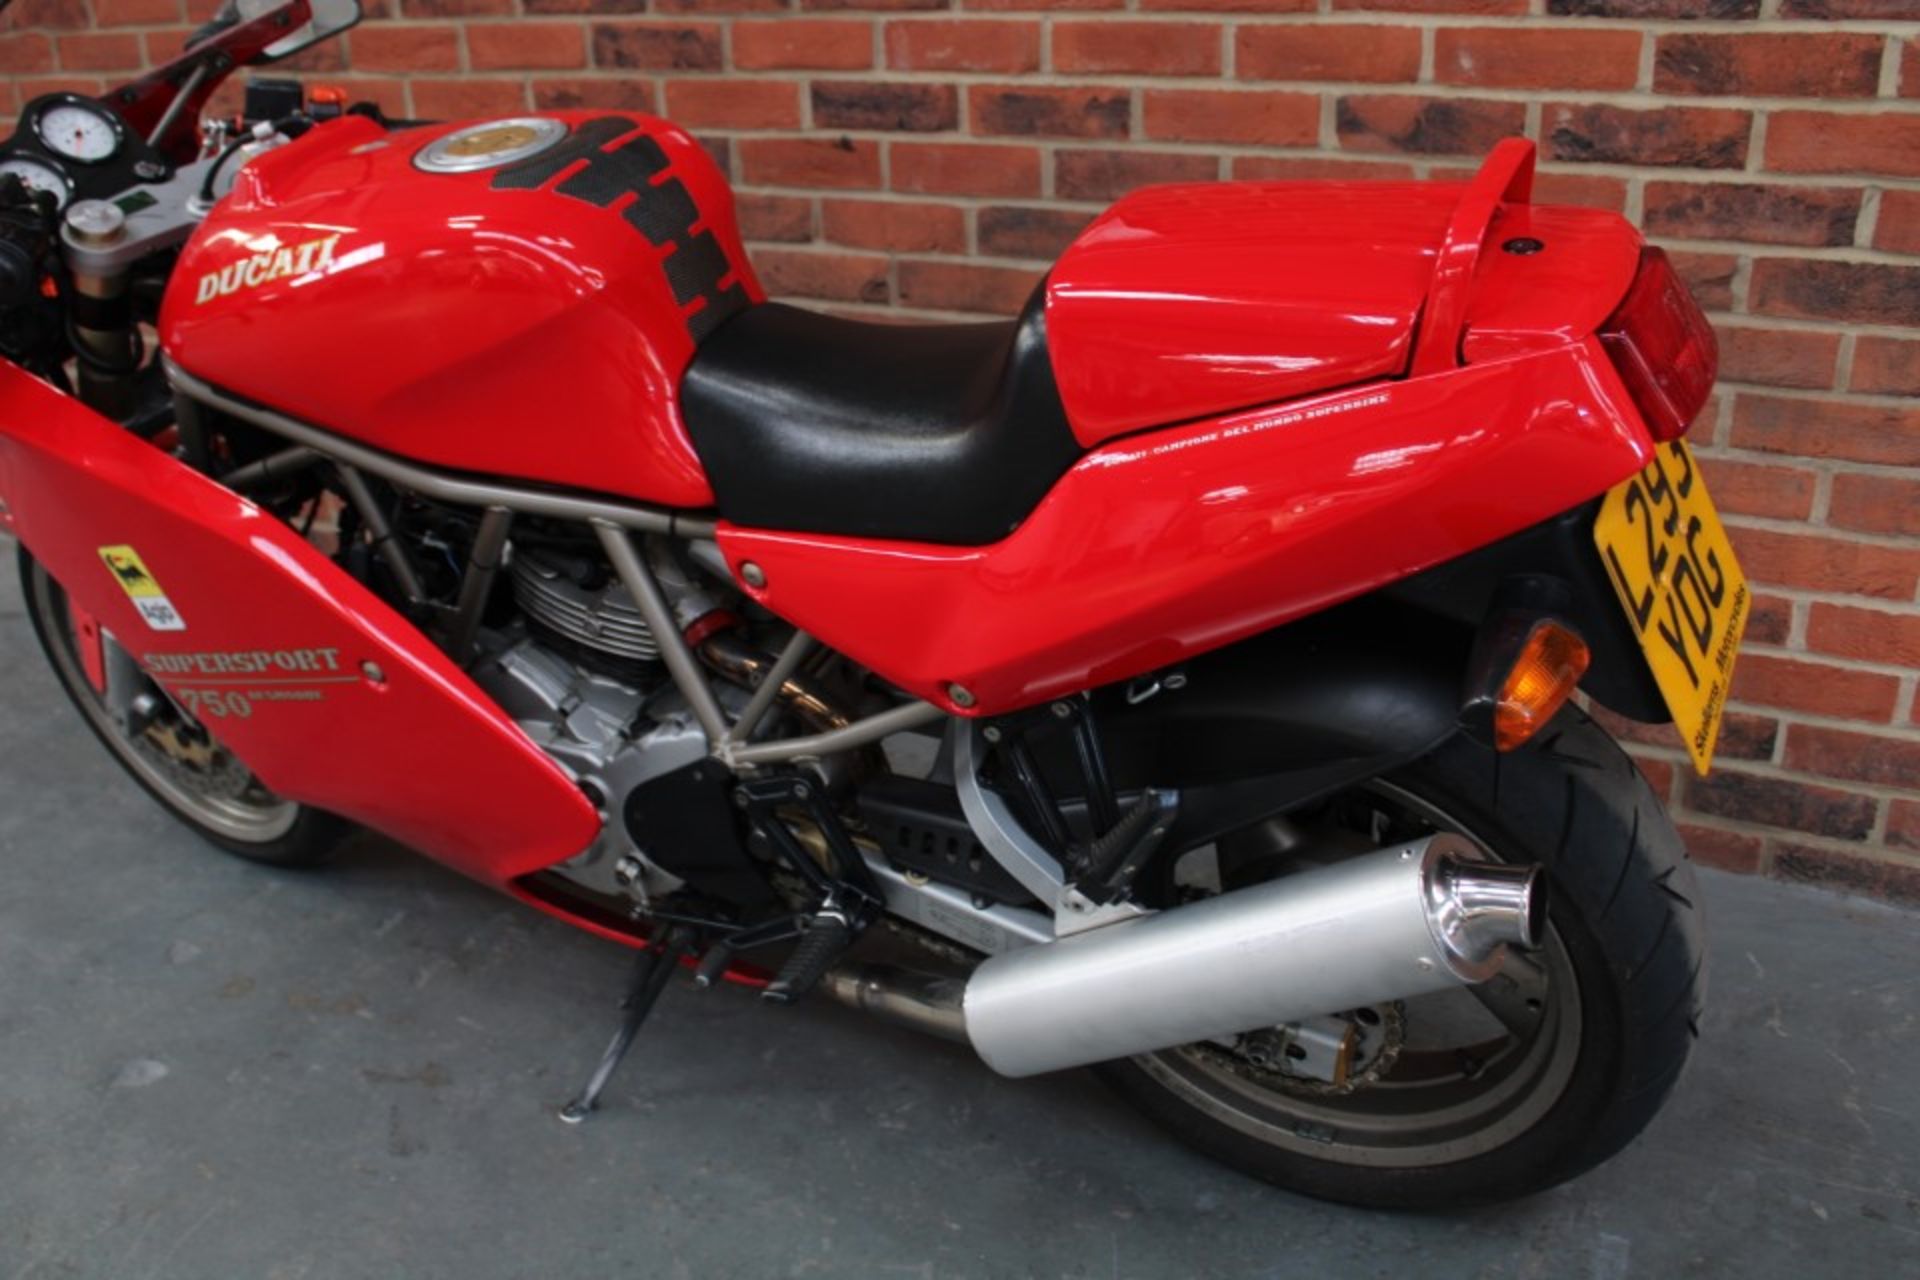 1994 Ducati 750 SS Supersport - Image 9 of 16